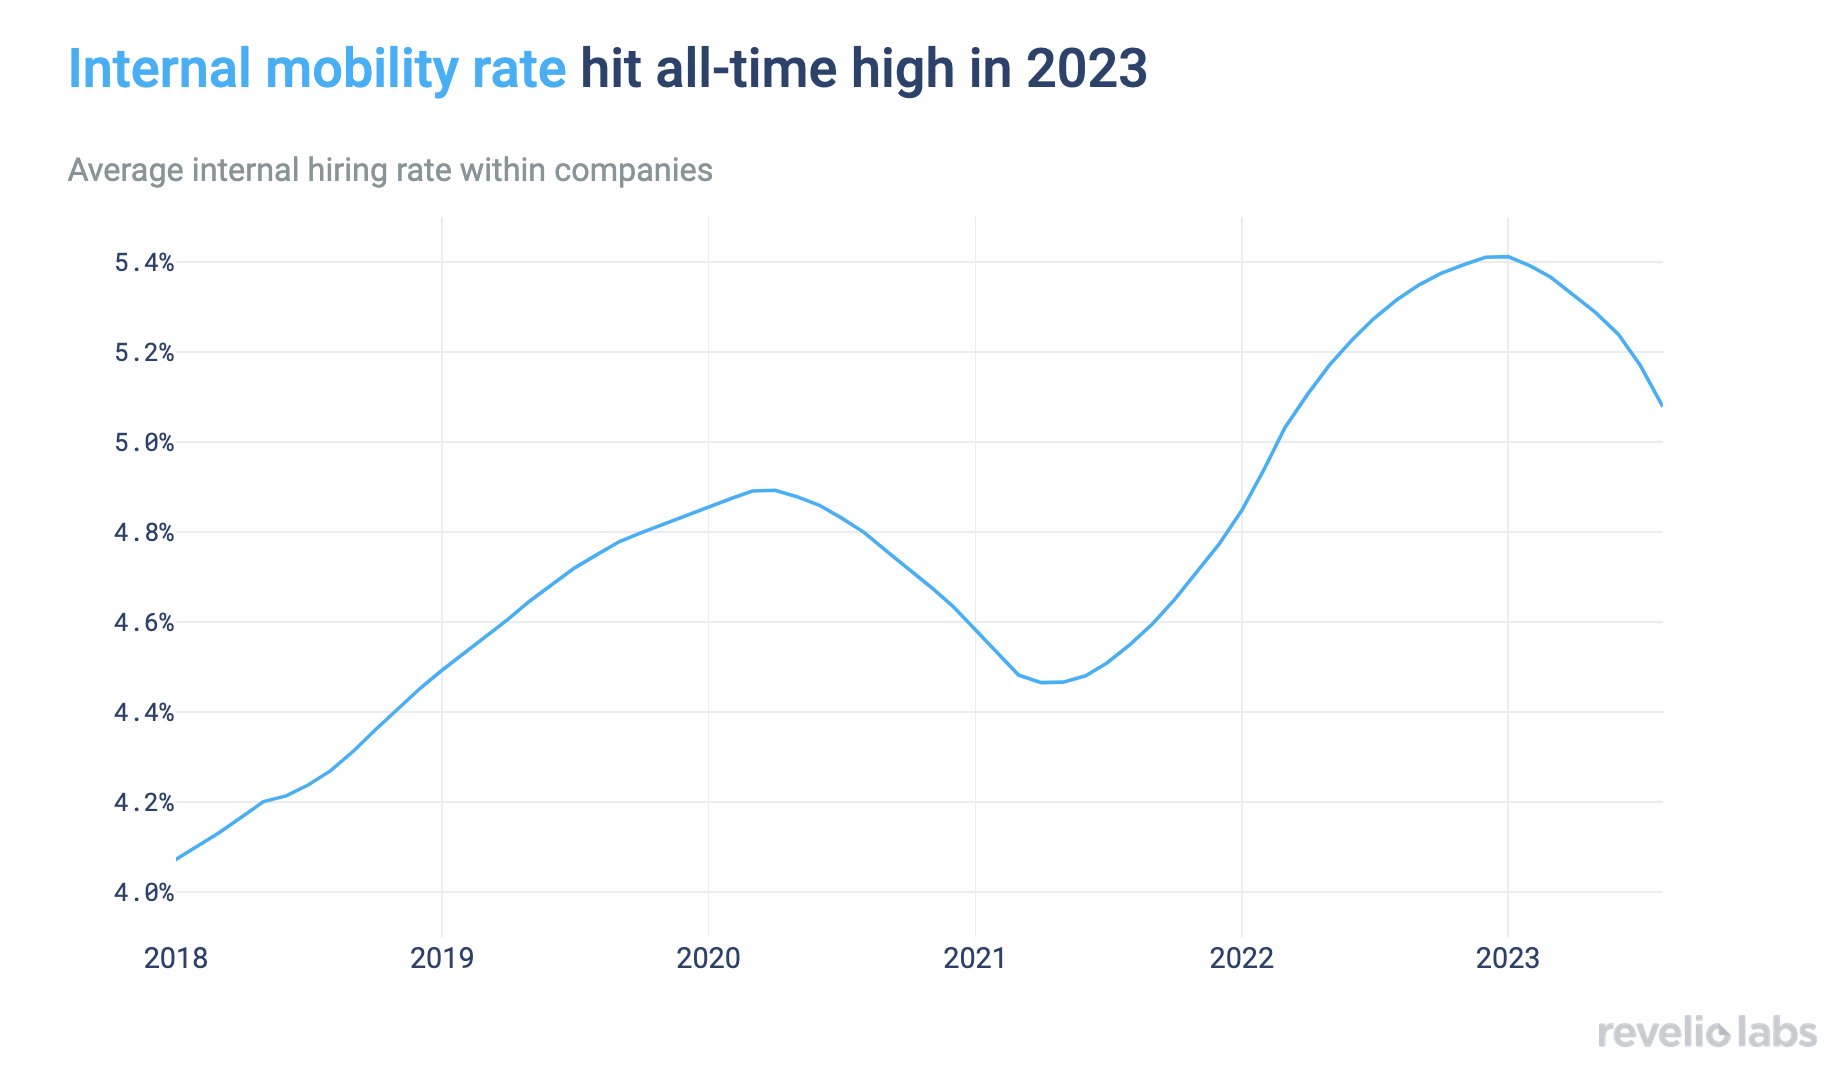 Internal mobility rate hit all time high in 2023